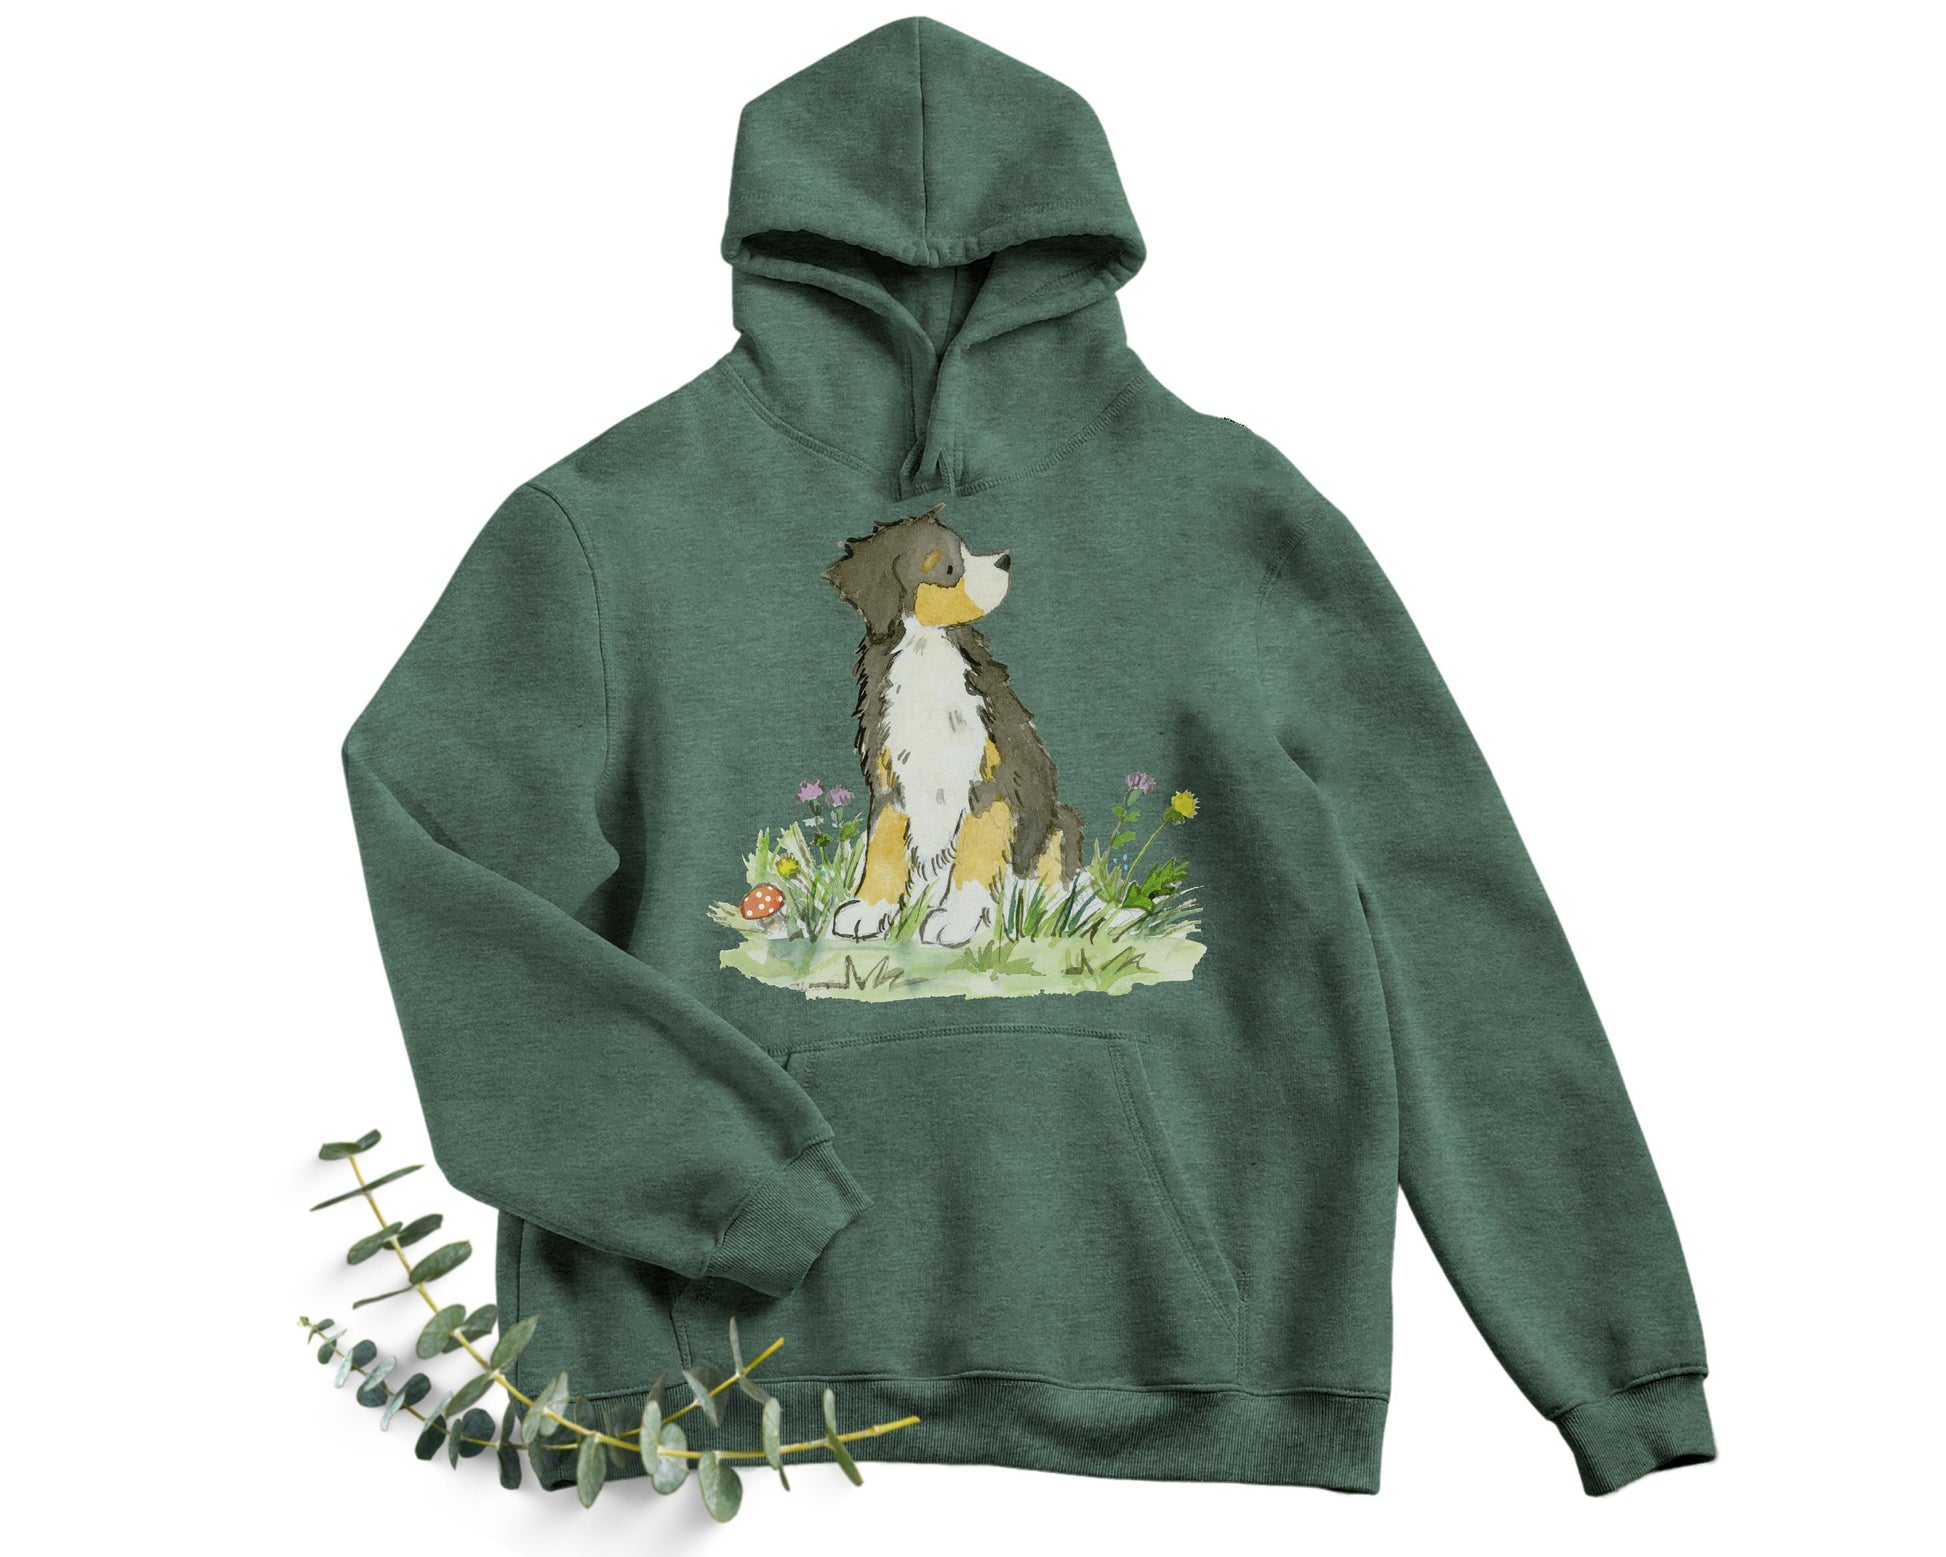 Green hooded sweatshirt with artwork of a Bernese Mountain Dog and Flowers on it.